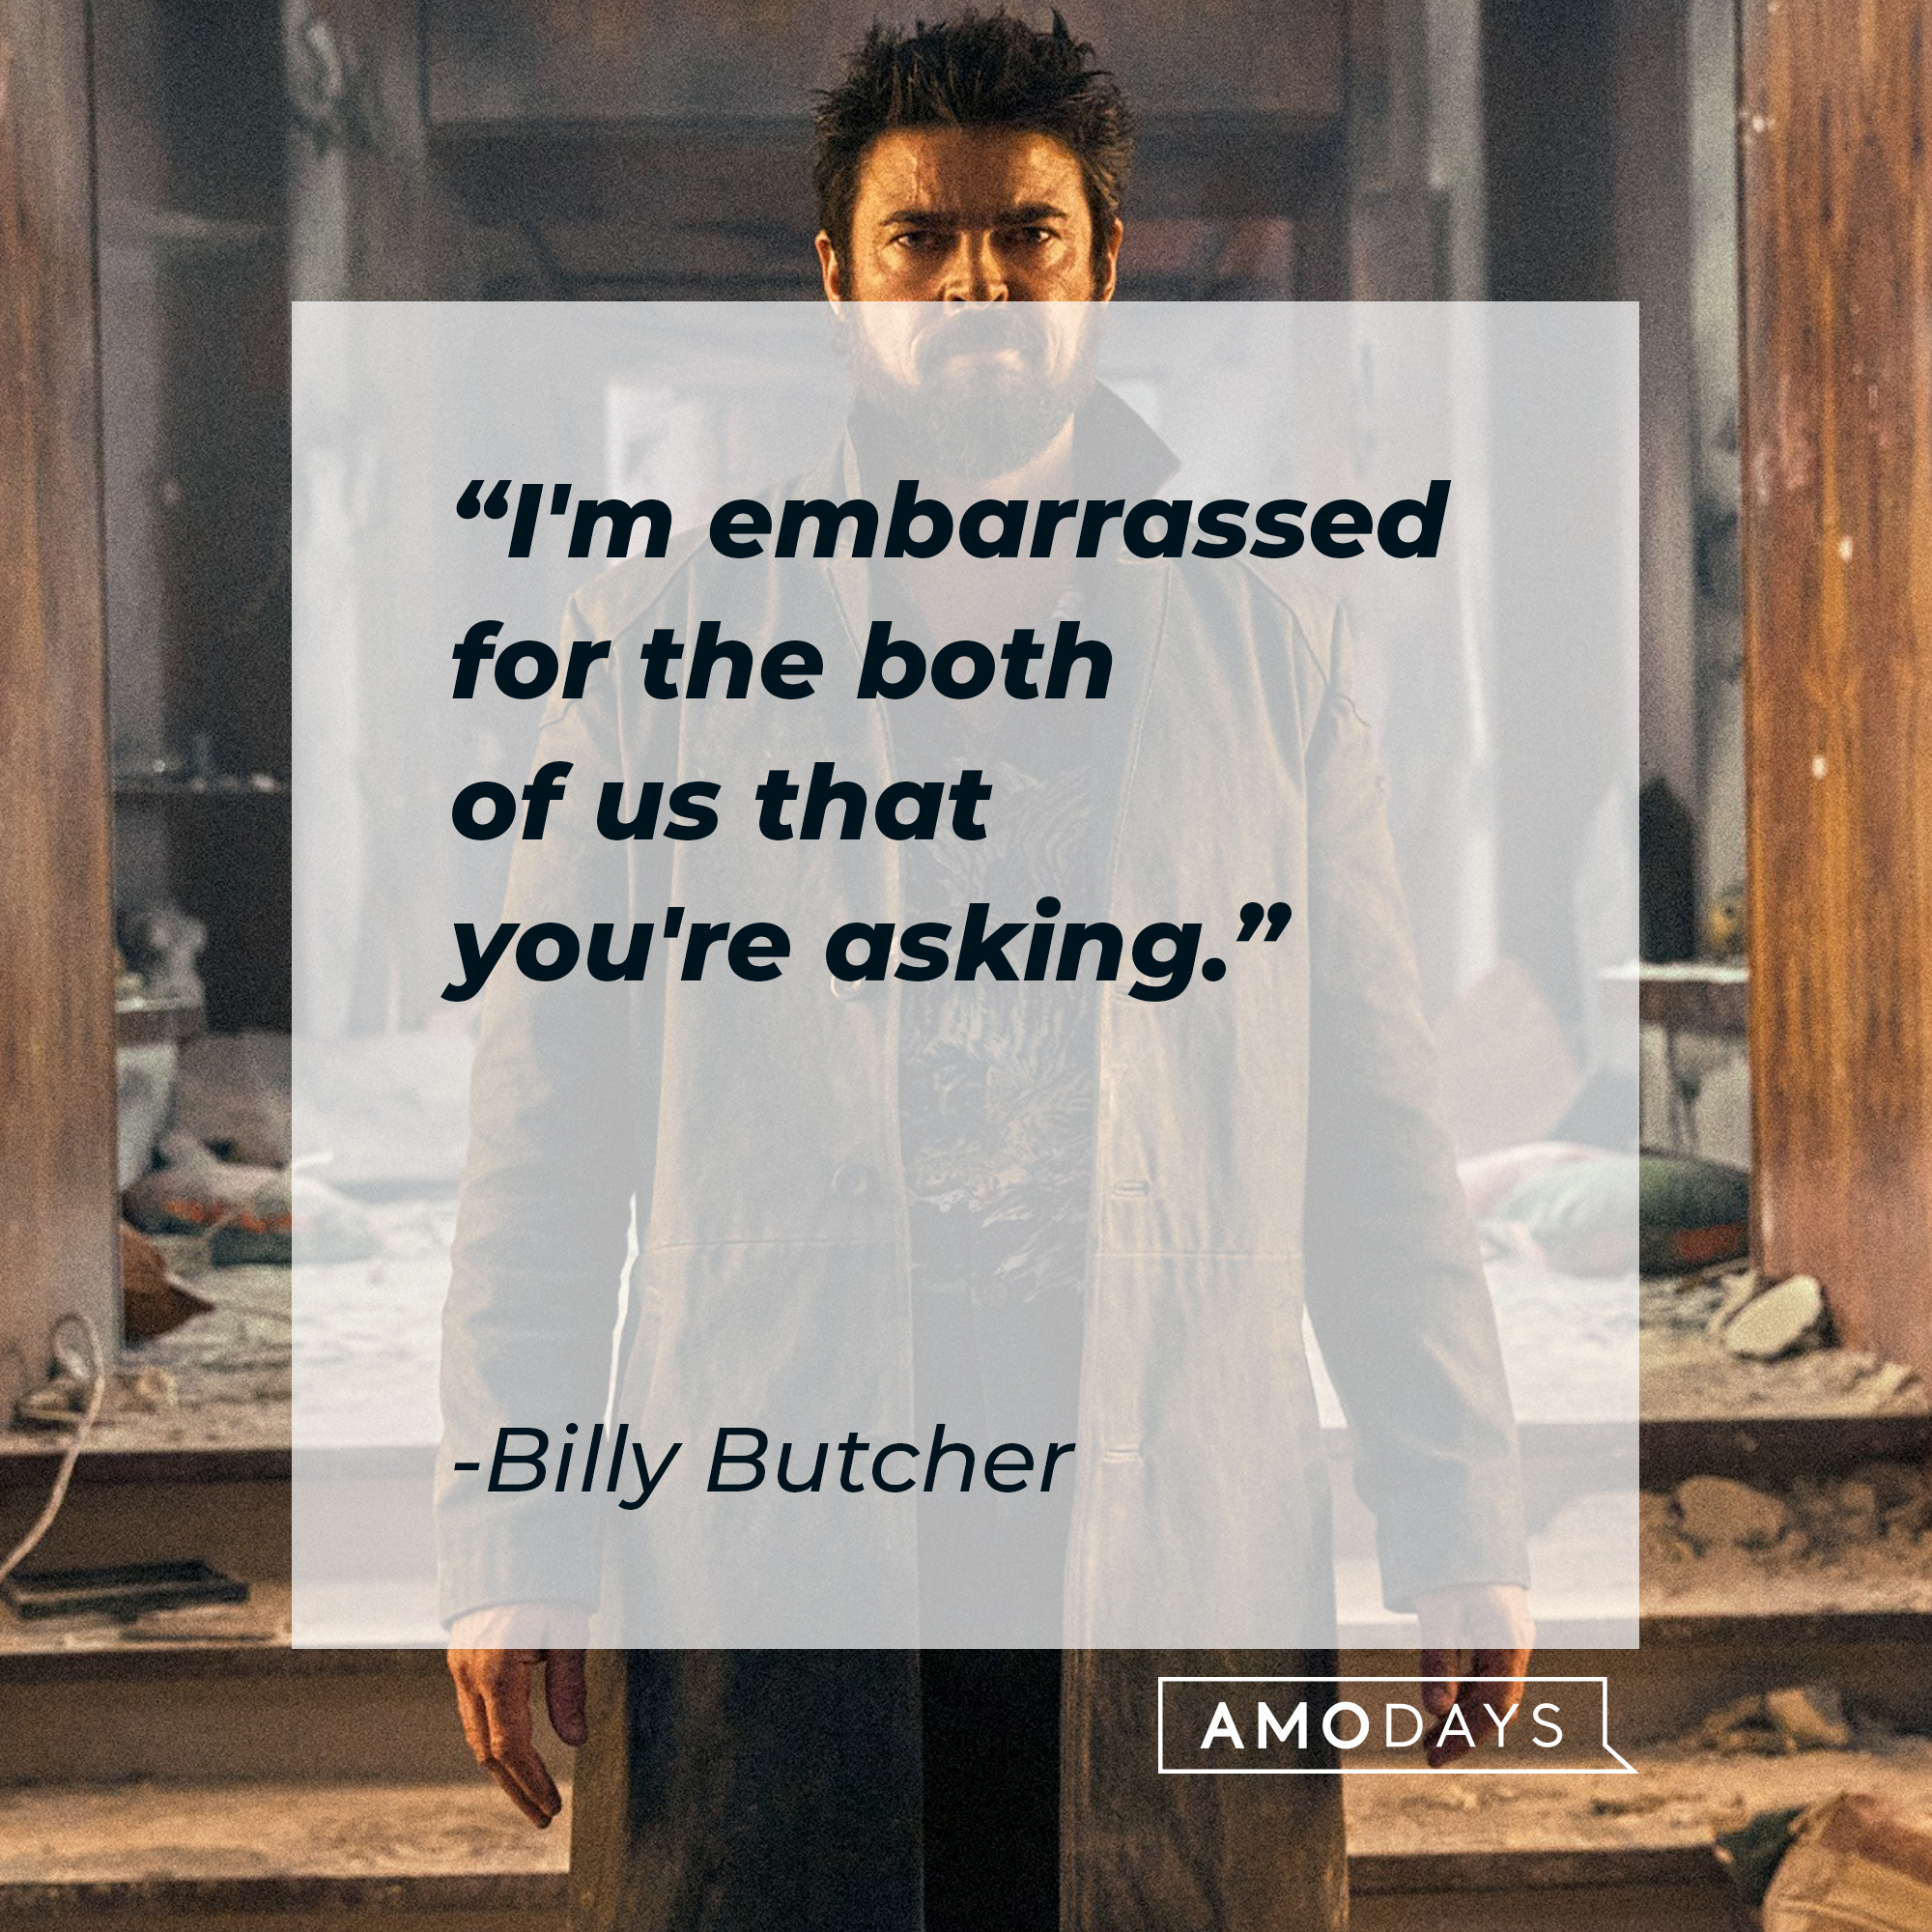 Billy Butcher's quote: "I'm embarrassed for the both of us that you're asking." | Source: Facebook.com/TheBoysTV